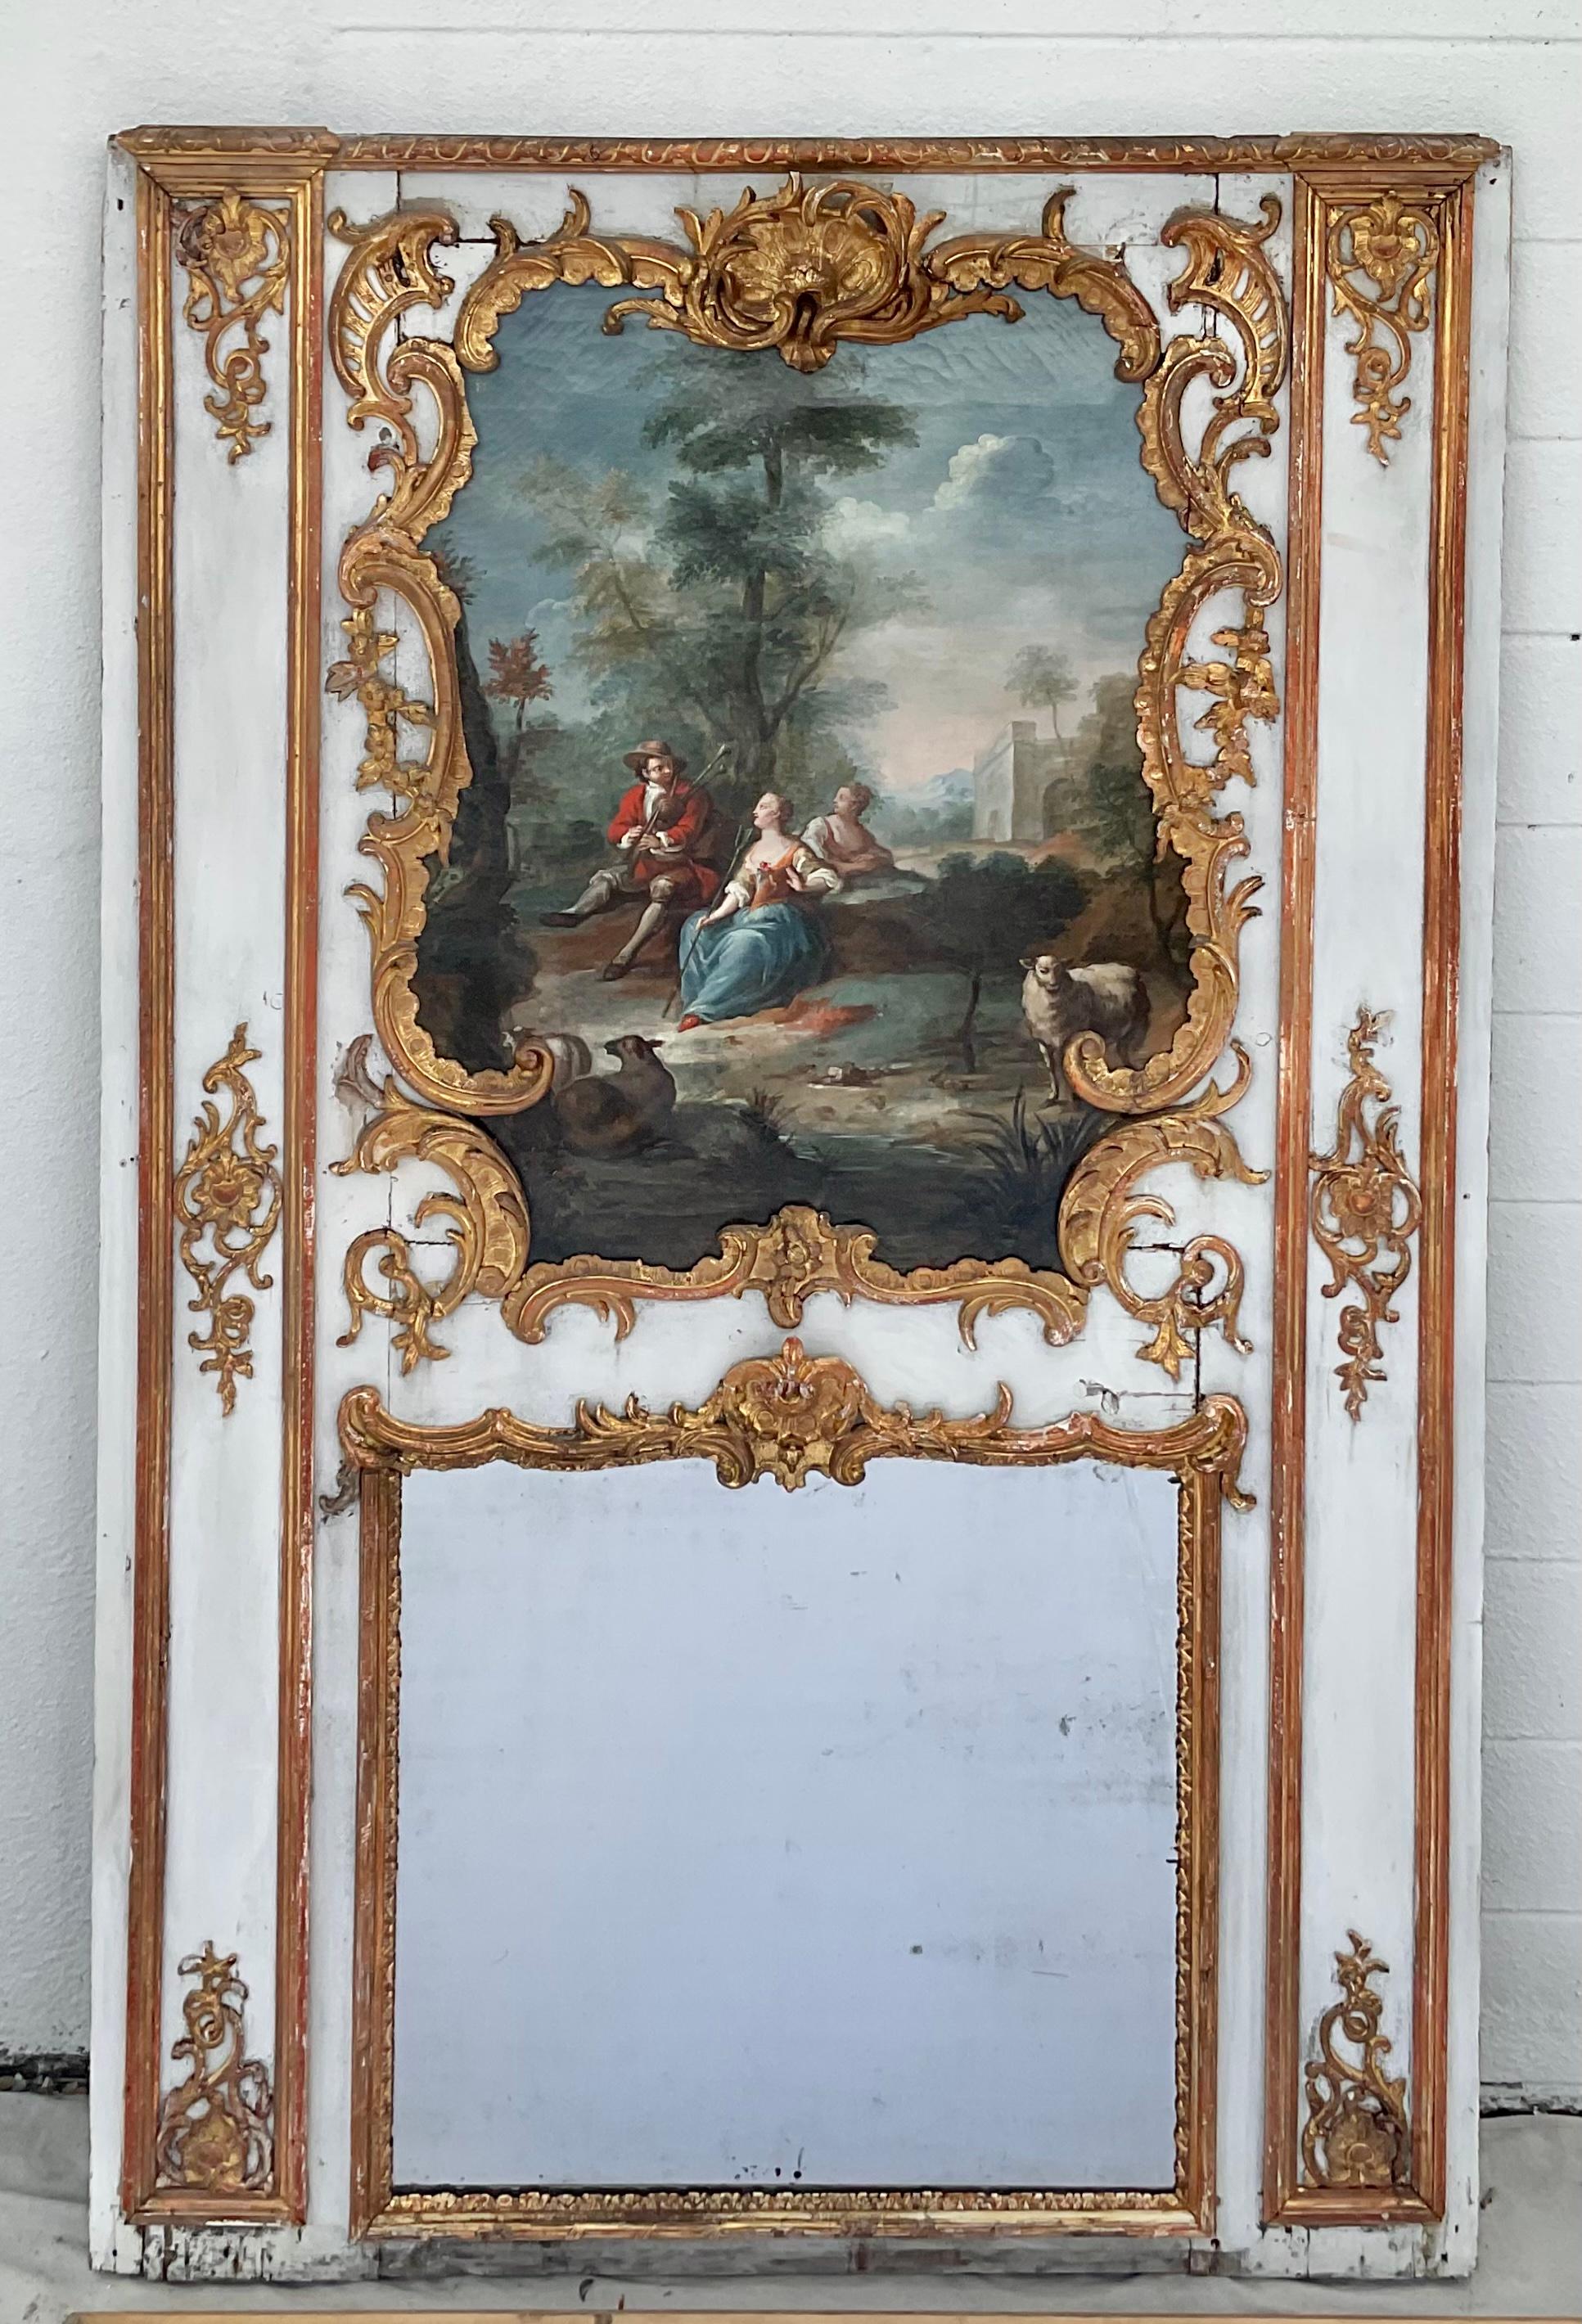 This is an absolutely magnificent 18th century French Louis XV Period Trumeau mirror. Featuring a distressed green painting frame, a finely carved gilt wood laurel leaf design all around, supporting a Baroque shell carving to the center just above